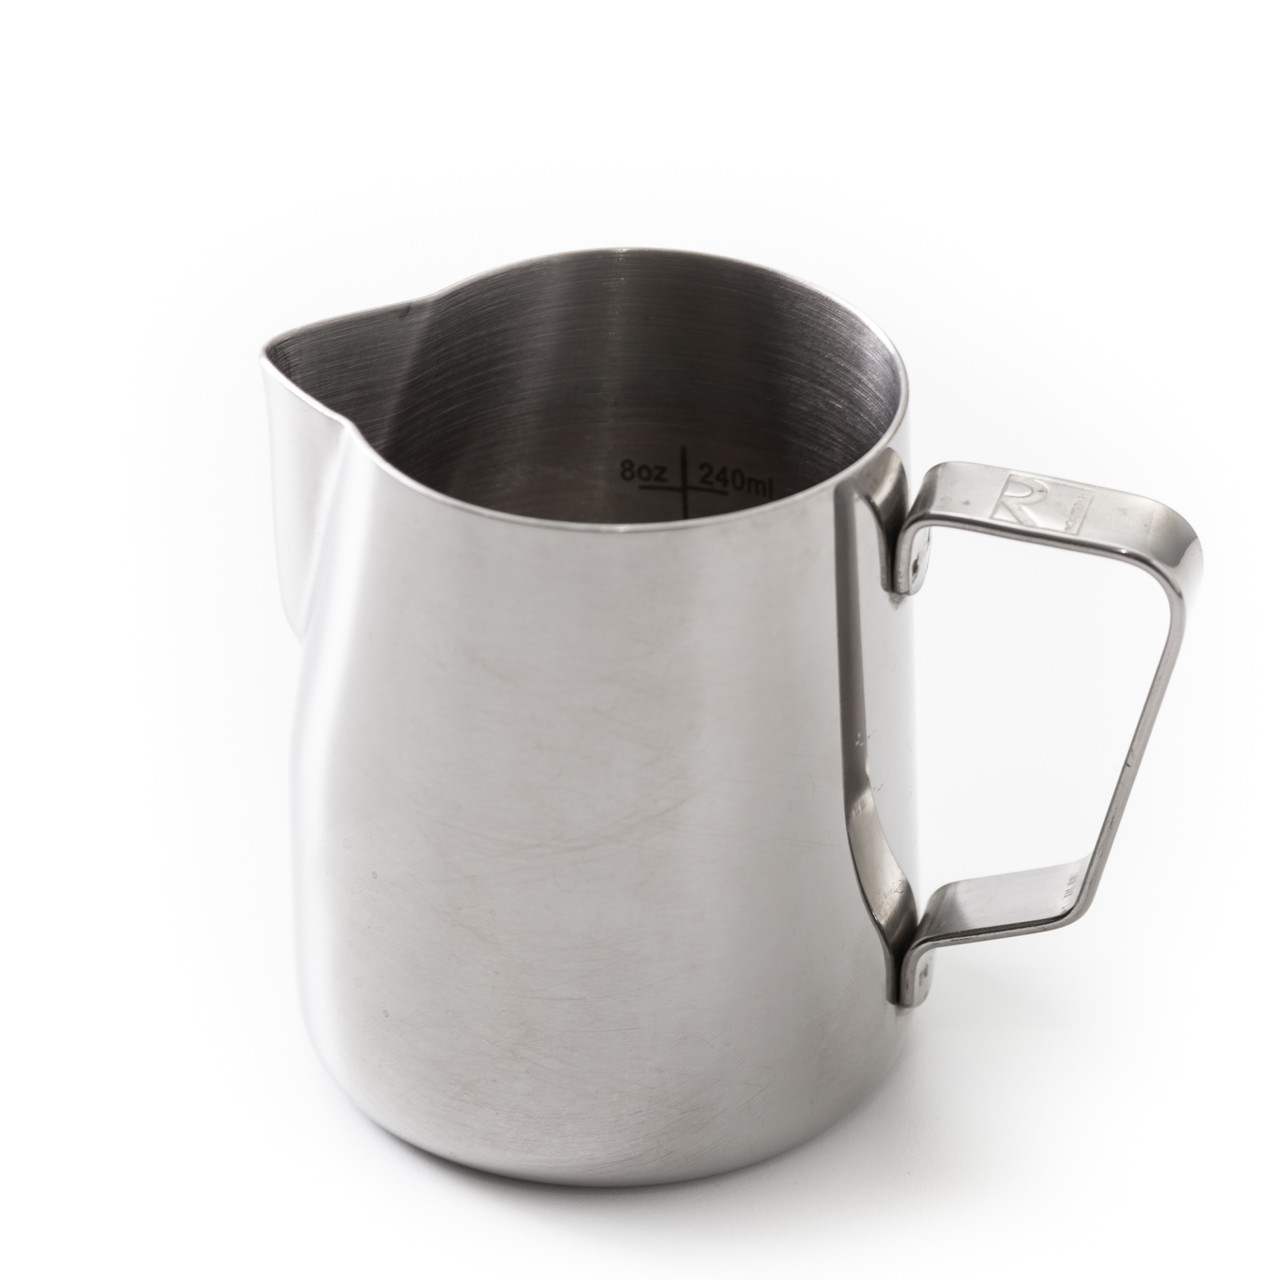 Milk Frothing Pitcher, Stainless Steel Steaming Pitcher, Milk